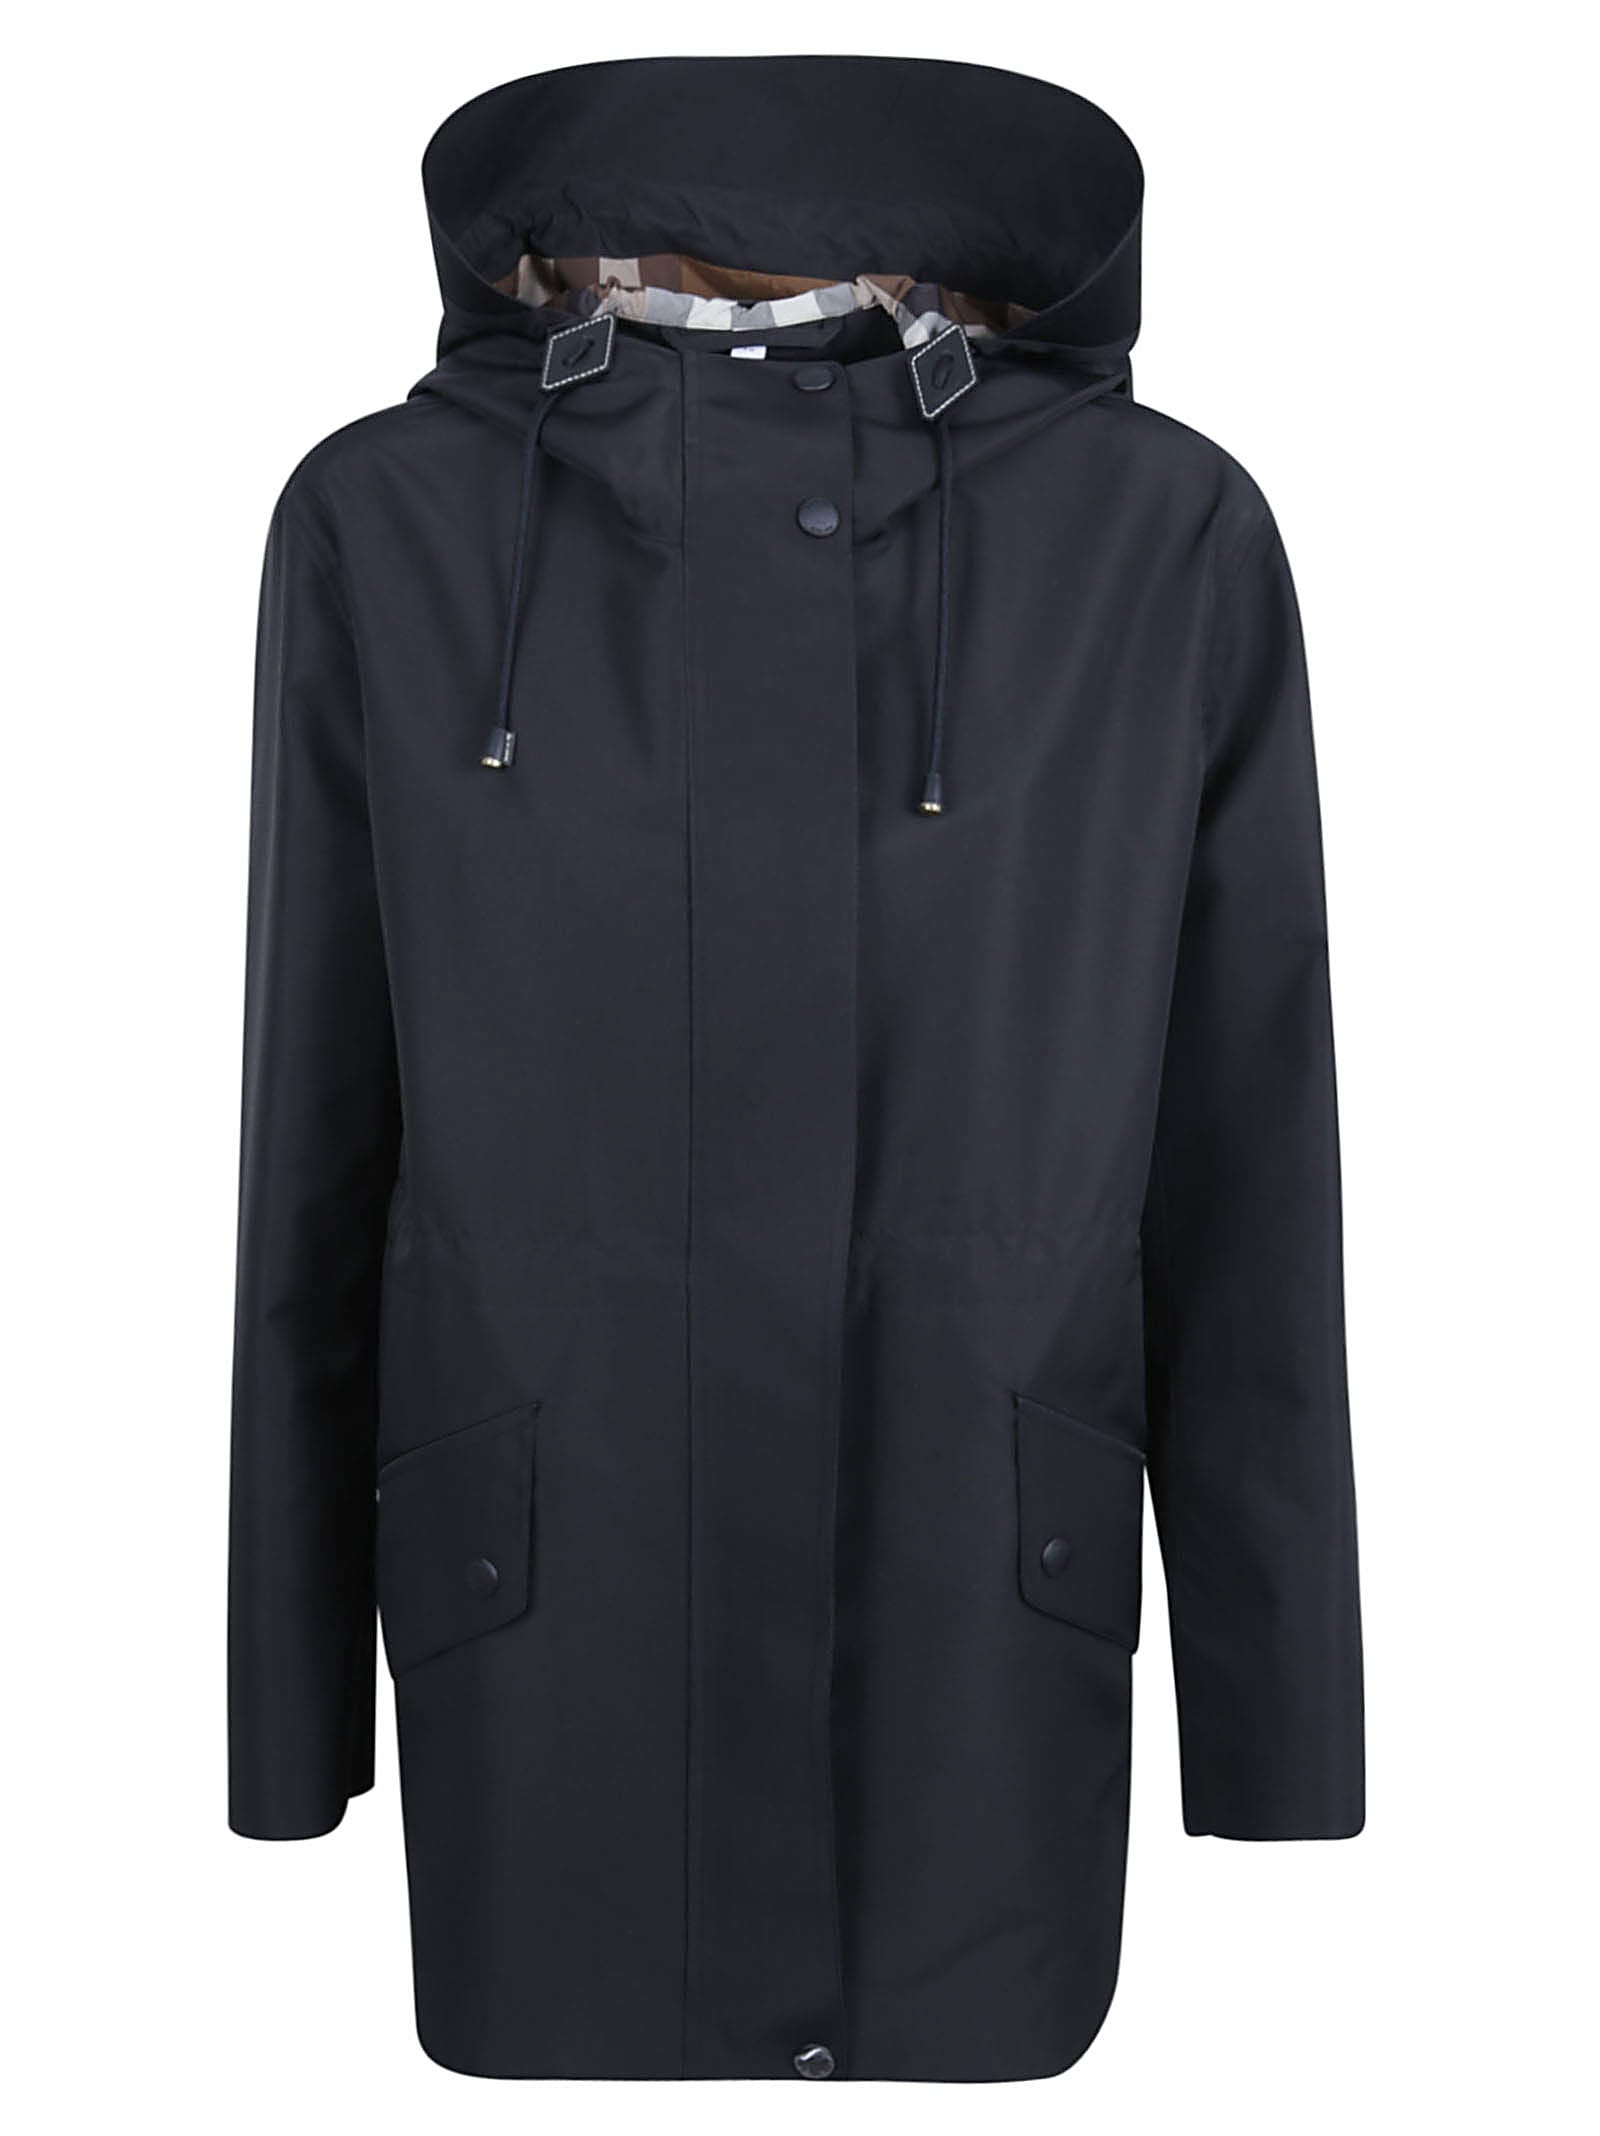 Burberry Hooded Parka